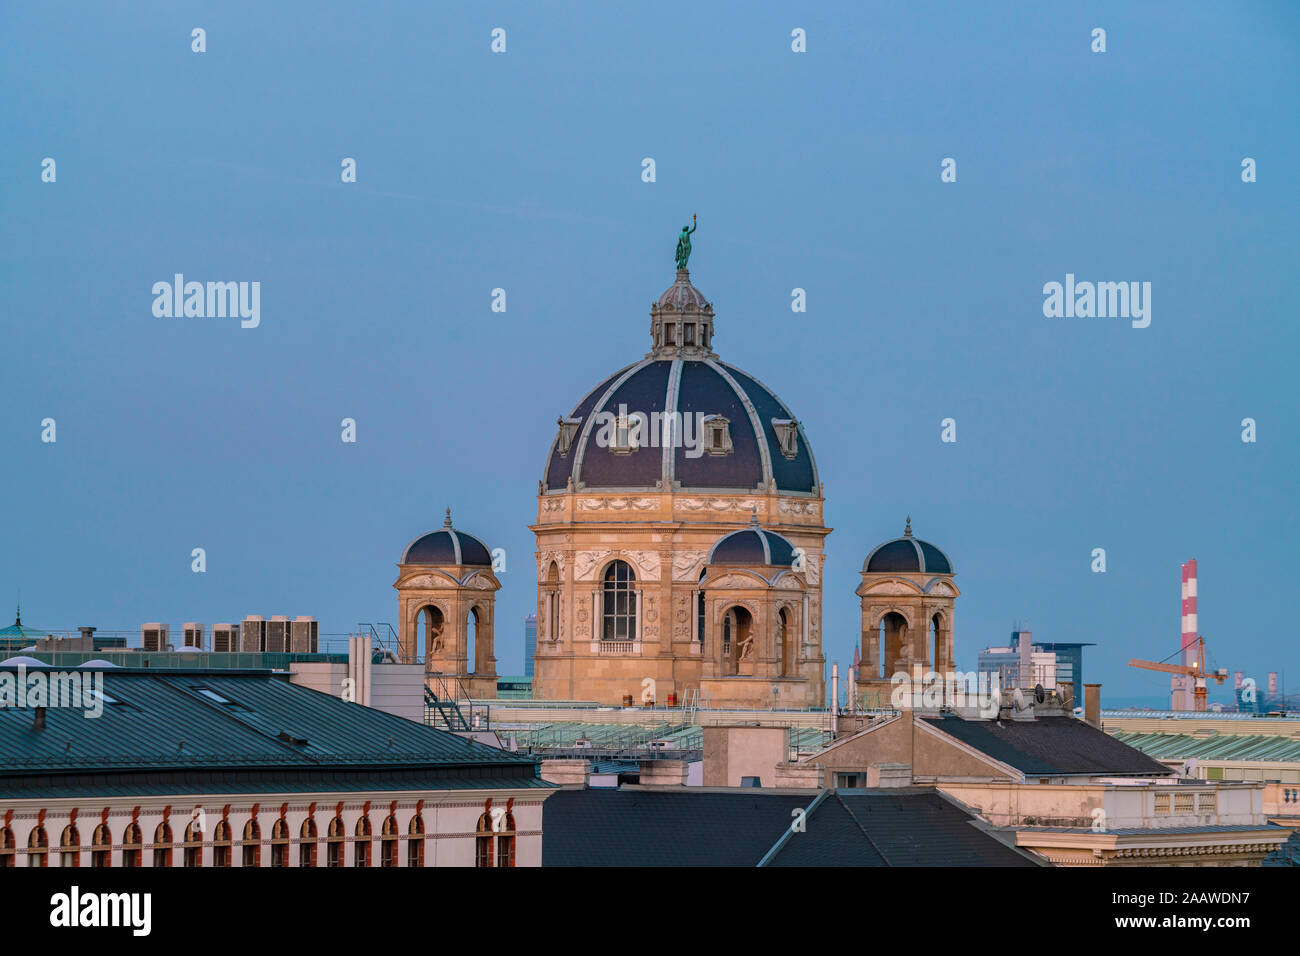 Exterior of Kunsthistorisches Museum against clear blue sky at Vienna, Austria Stock Photo